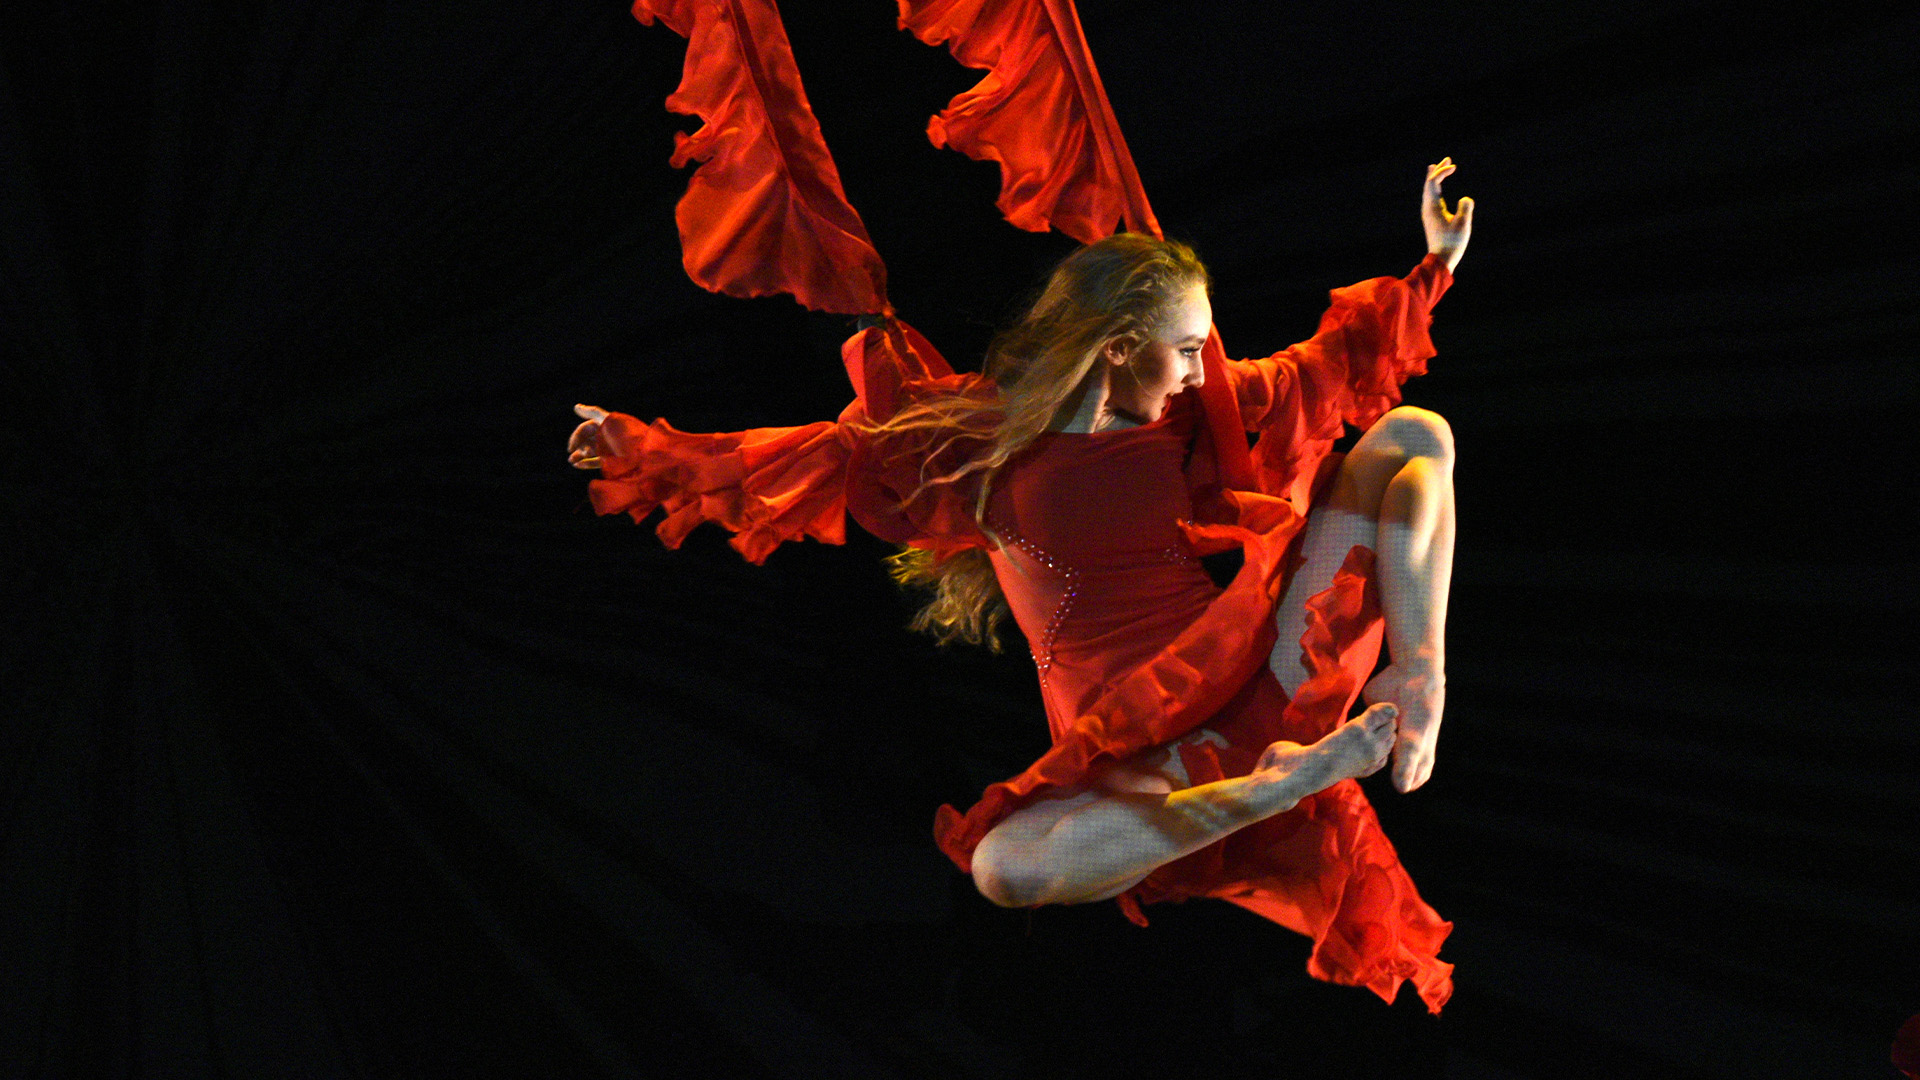 dancer in red costume jumping